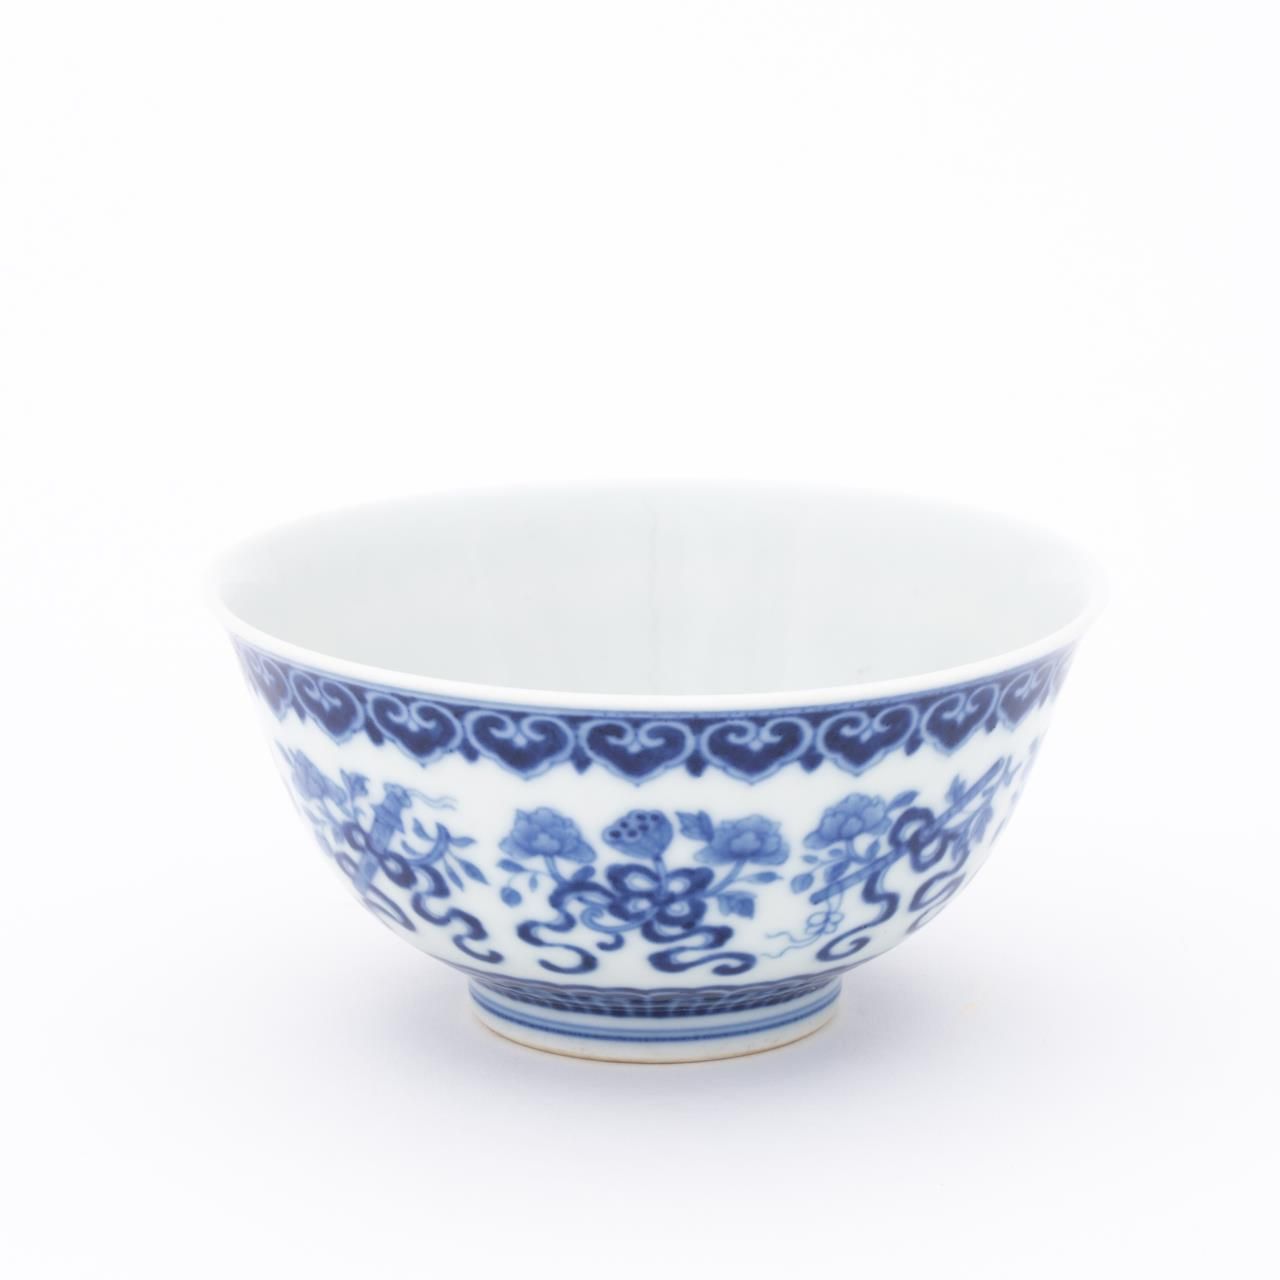 SMALL CHINESE BLUE WHITE PORCELAIN 35db28